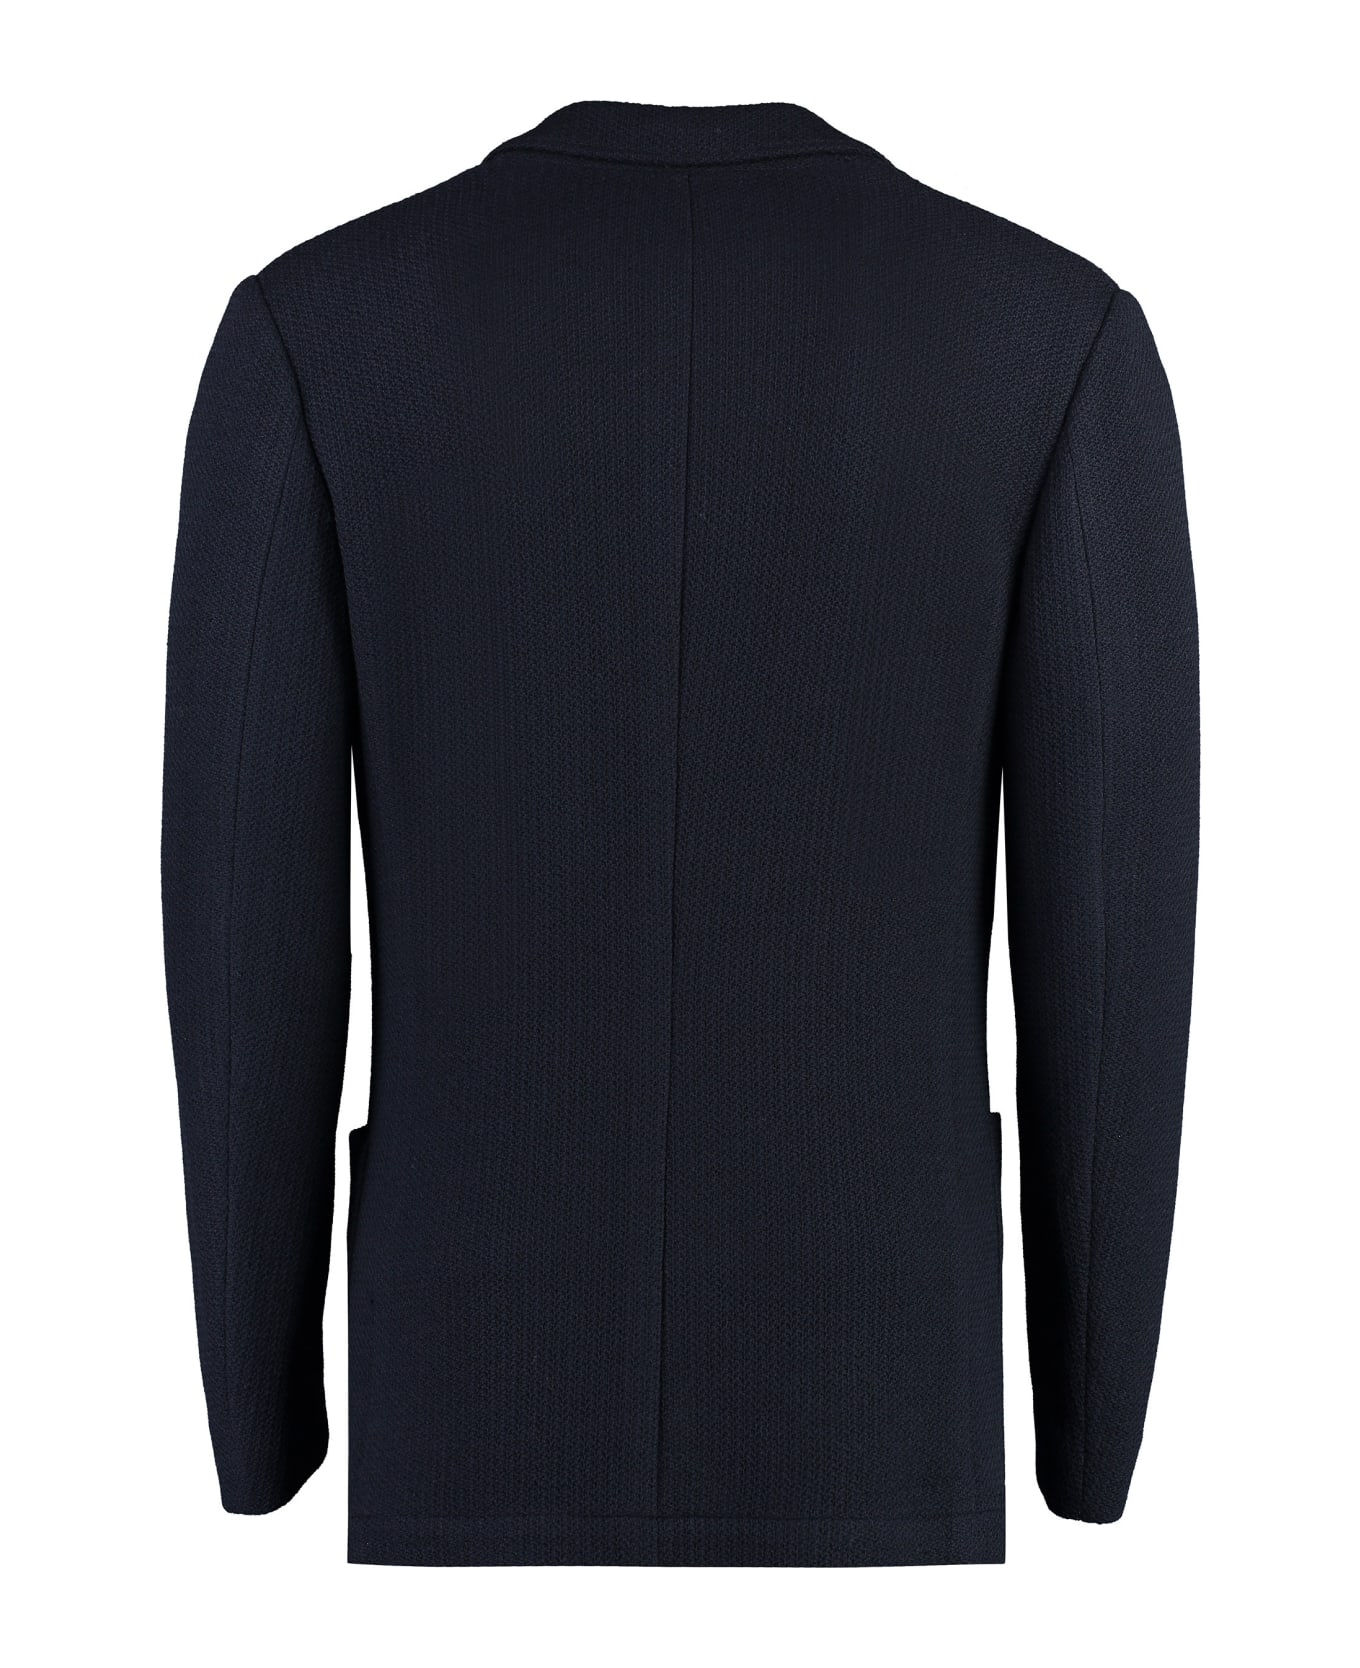 Canali Single-breasted Wool Jacket - blue ブレザー